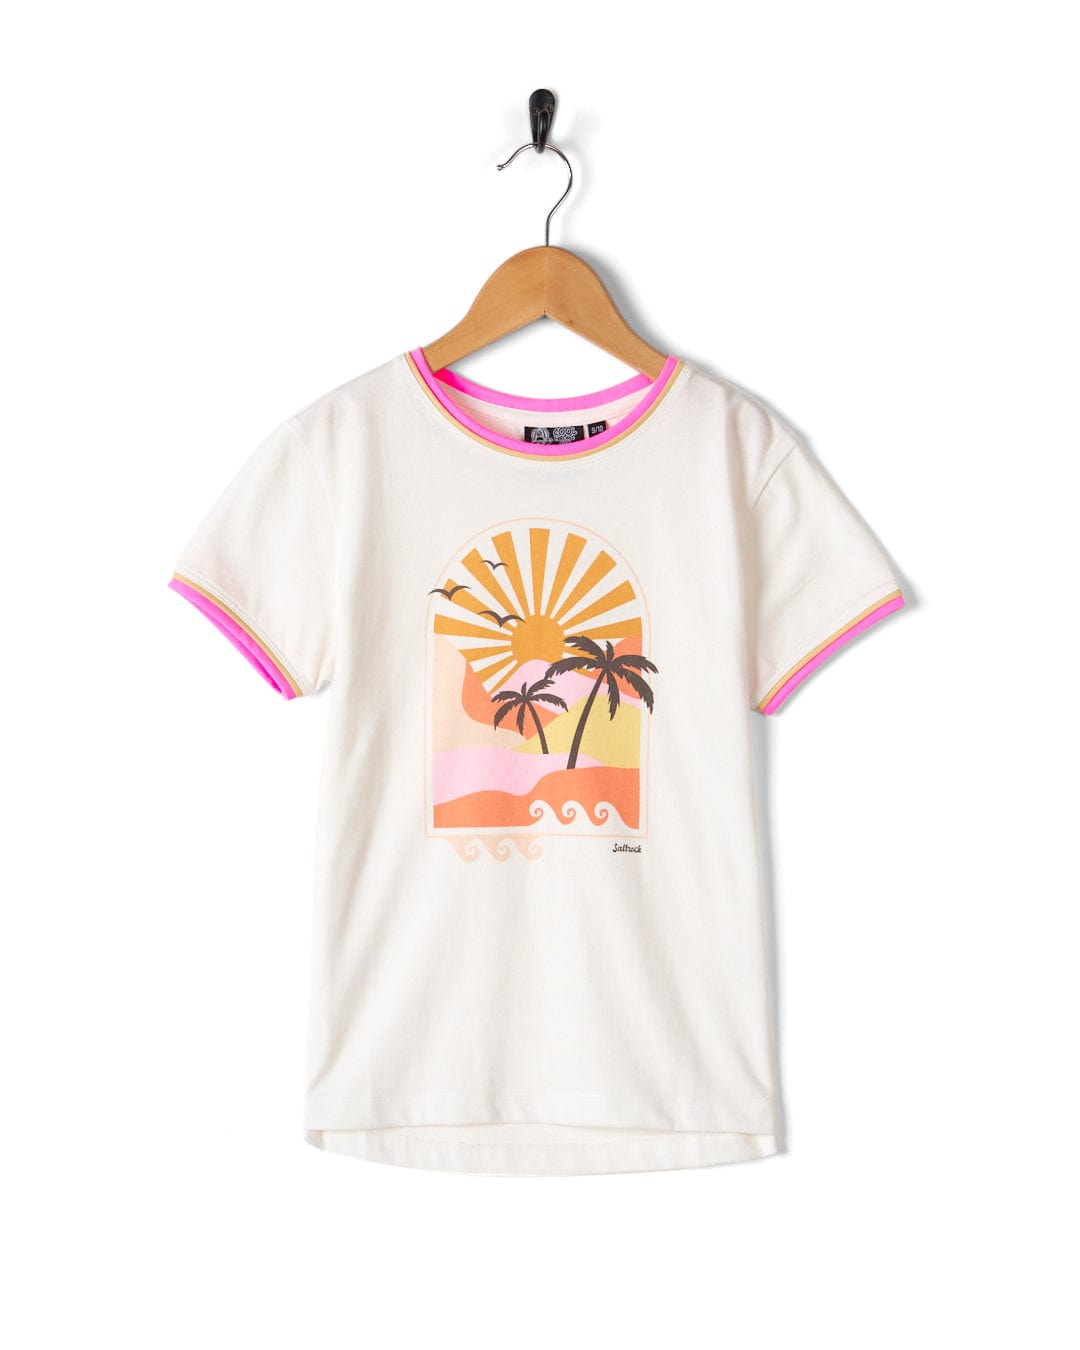 A Retro Seascape Kids Short Sleeve T-Shirt in white with pink trim on a 100% Cotton swinger by Saltrock.